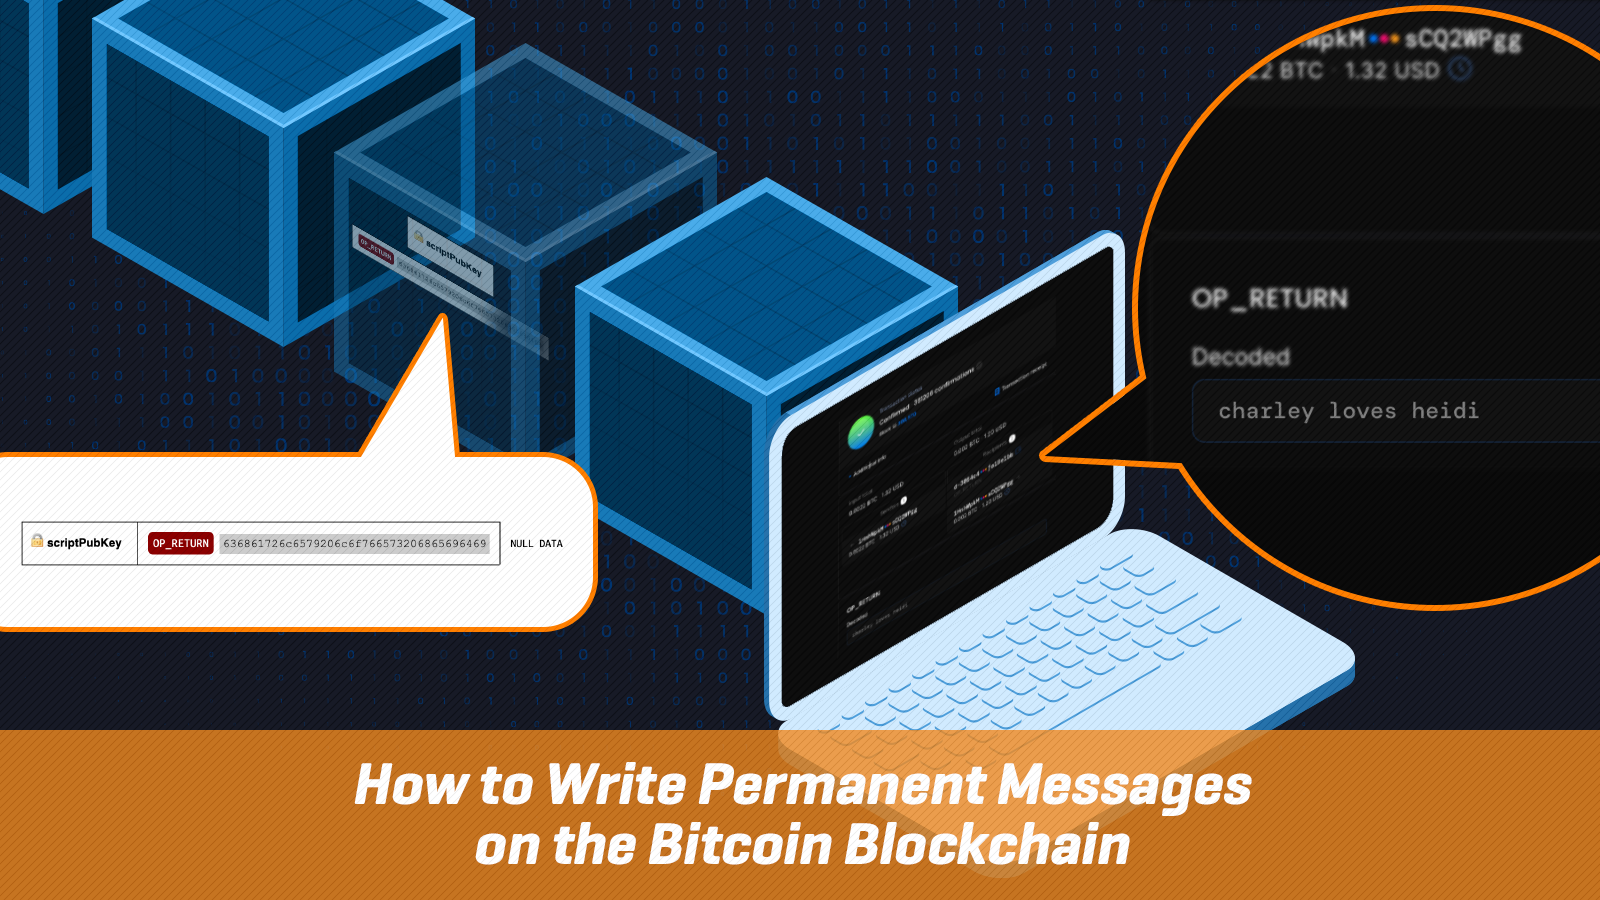 How to Write Permanent Messages on the Bitcoin Blockchain